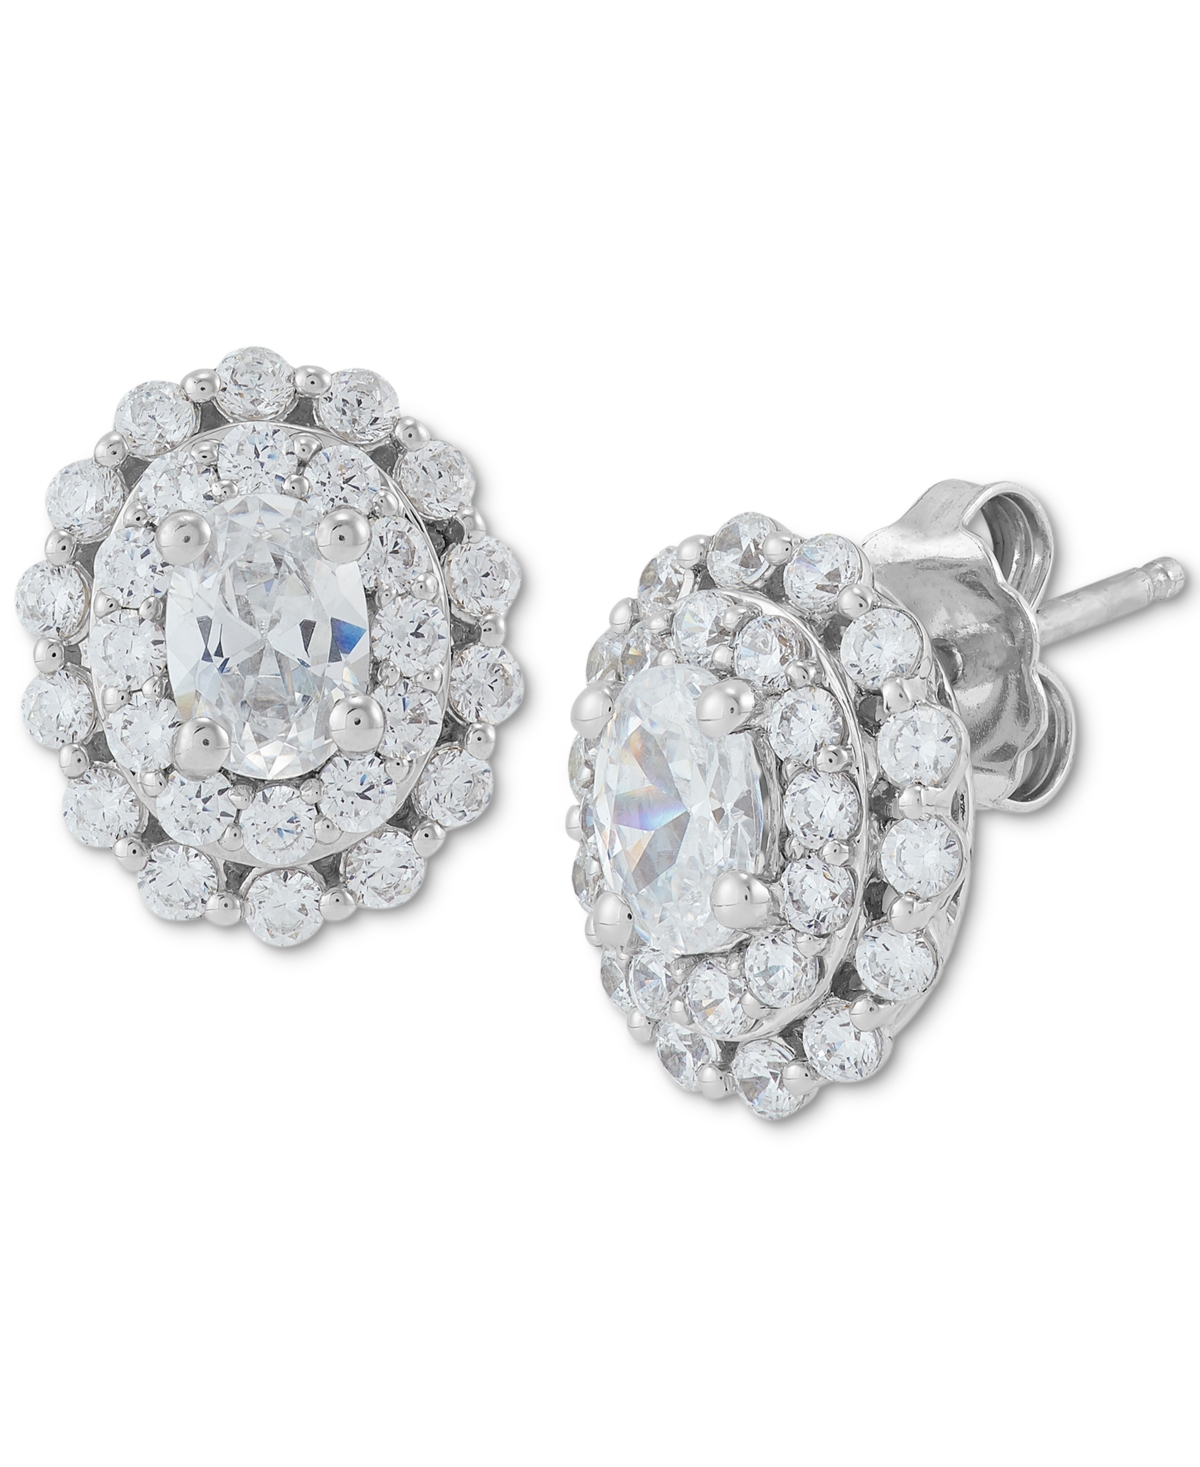 Lab Grown Diamond Oval Halo Stud Earrings (1-1/2 ct. t.w.) in 14k White Gold - White Gold